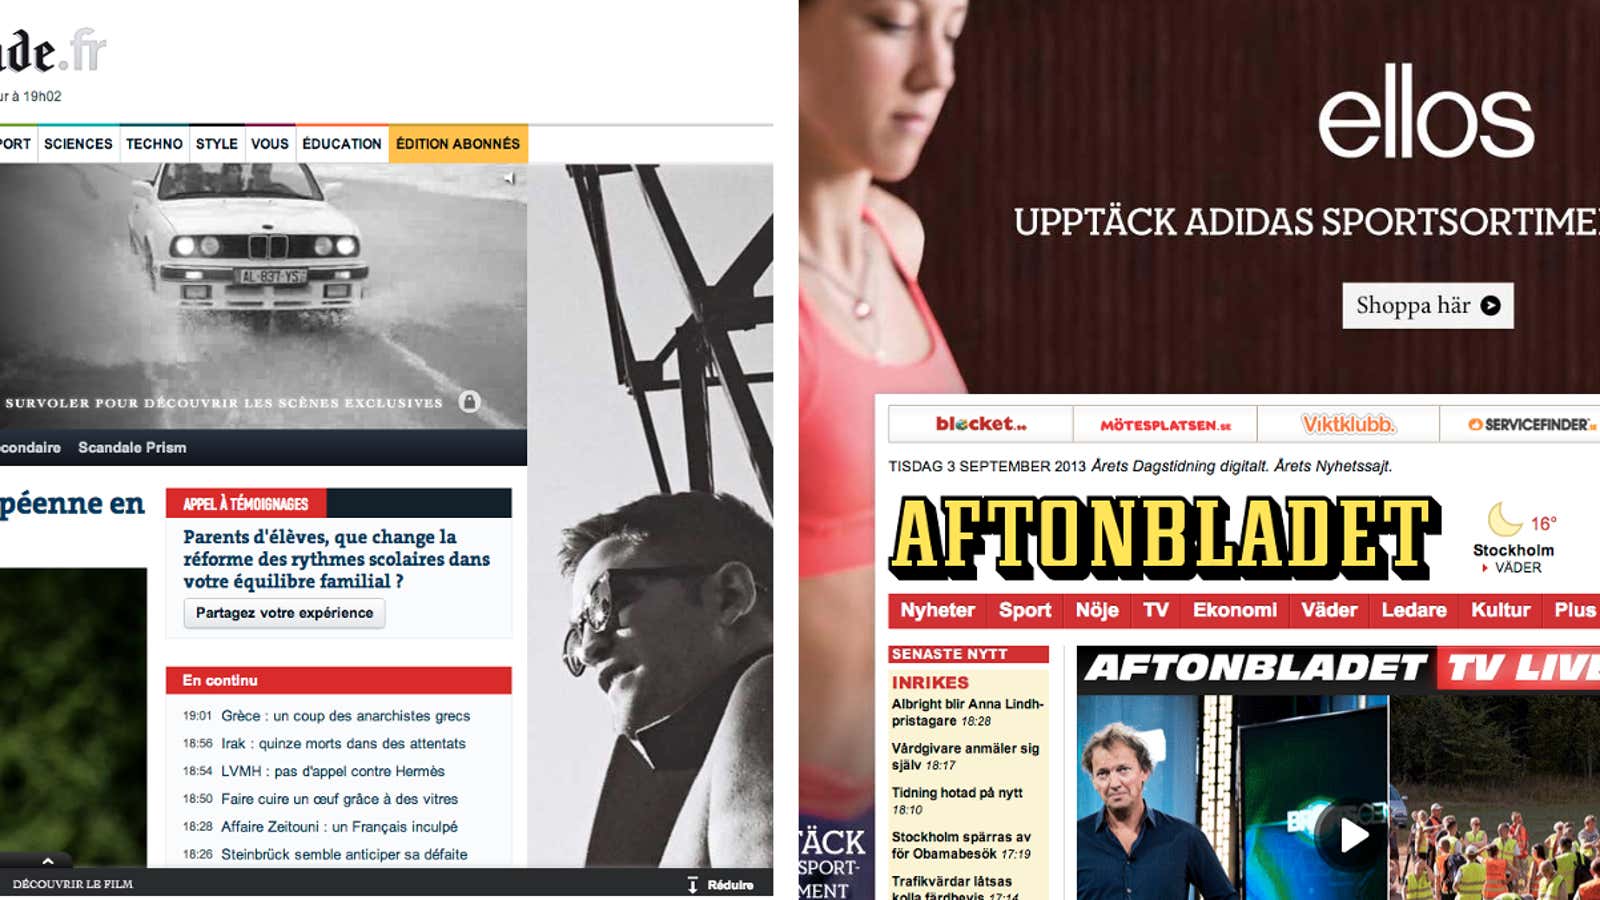 Le Monde and Aftonbladet are among the sites that assault readers with ads.